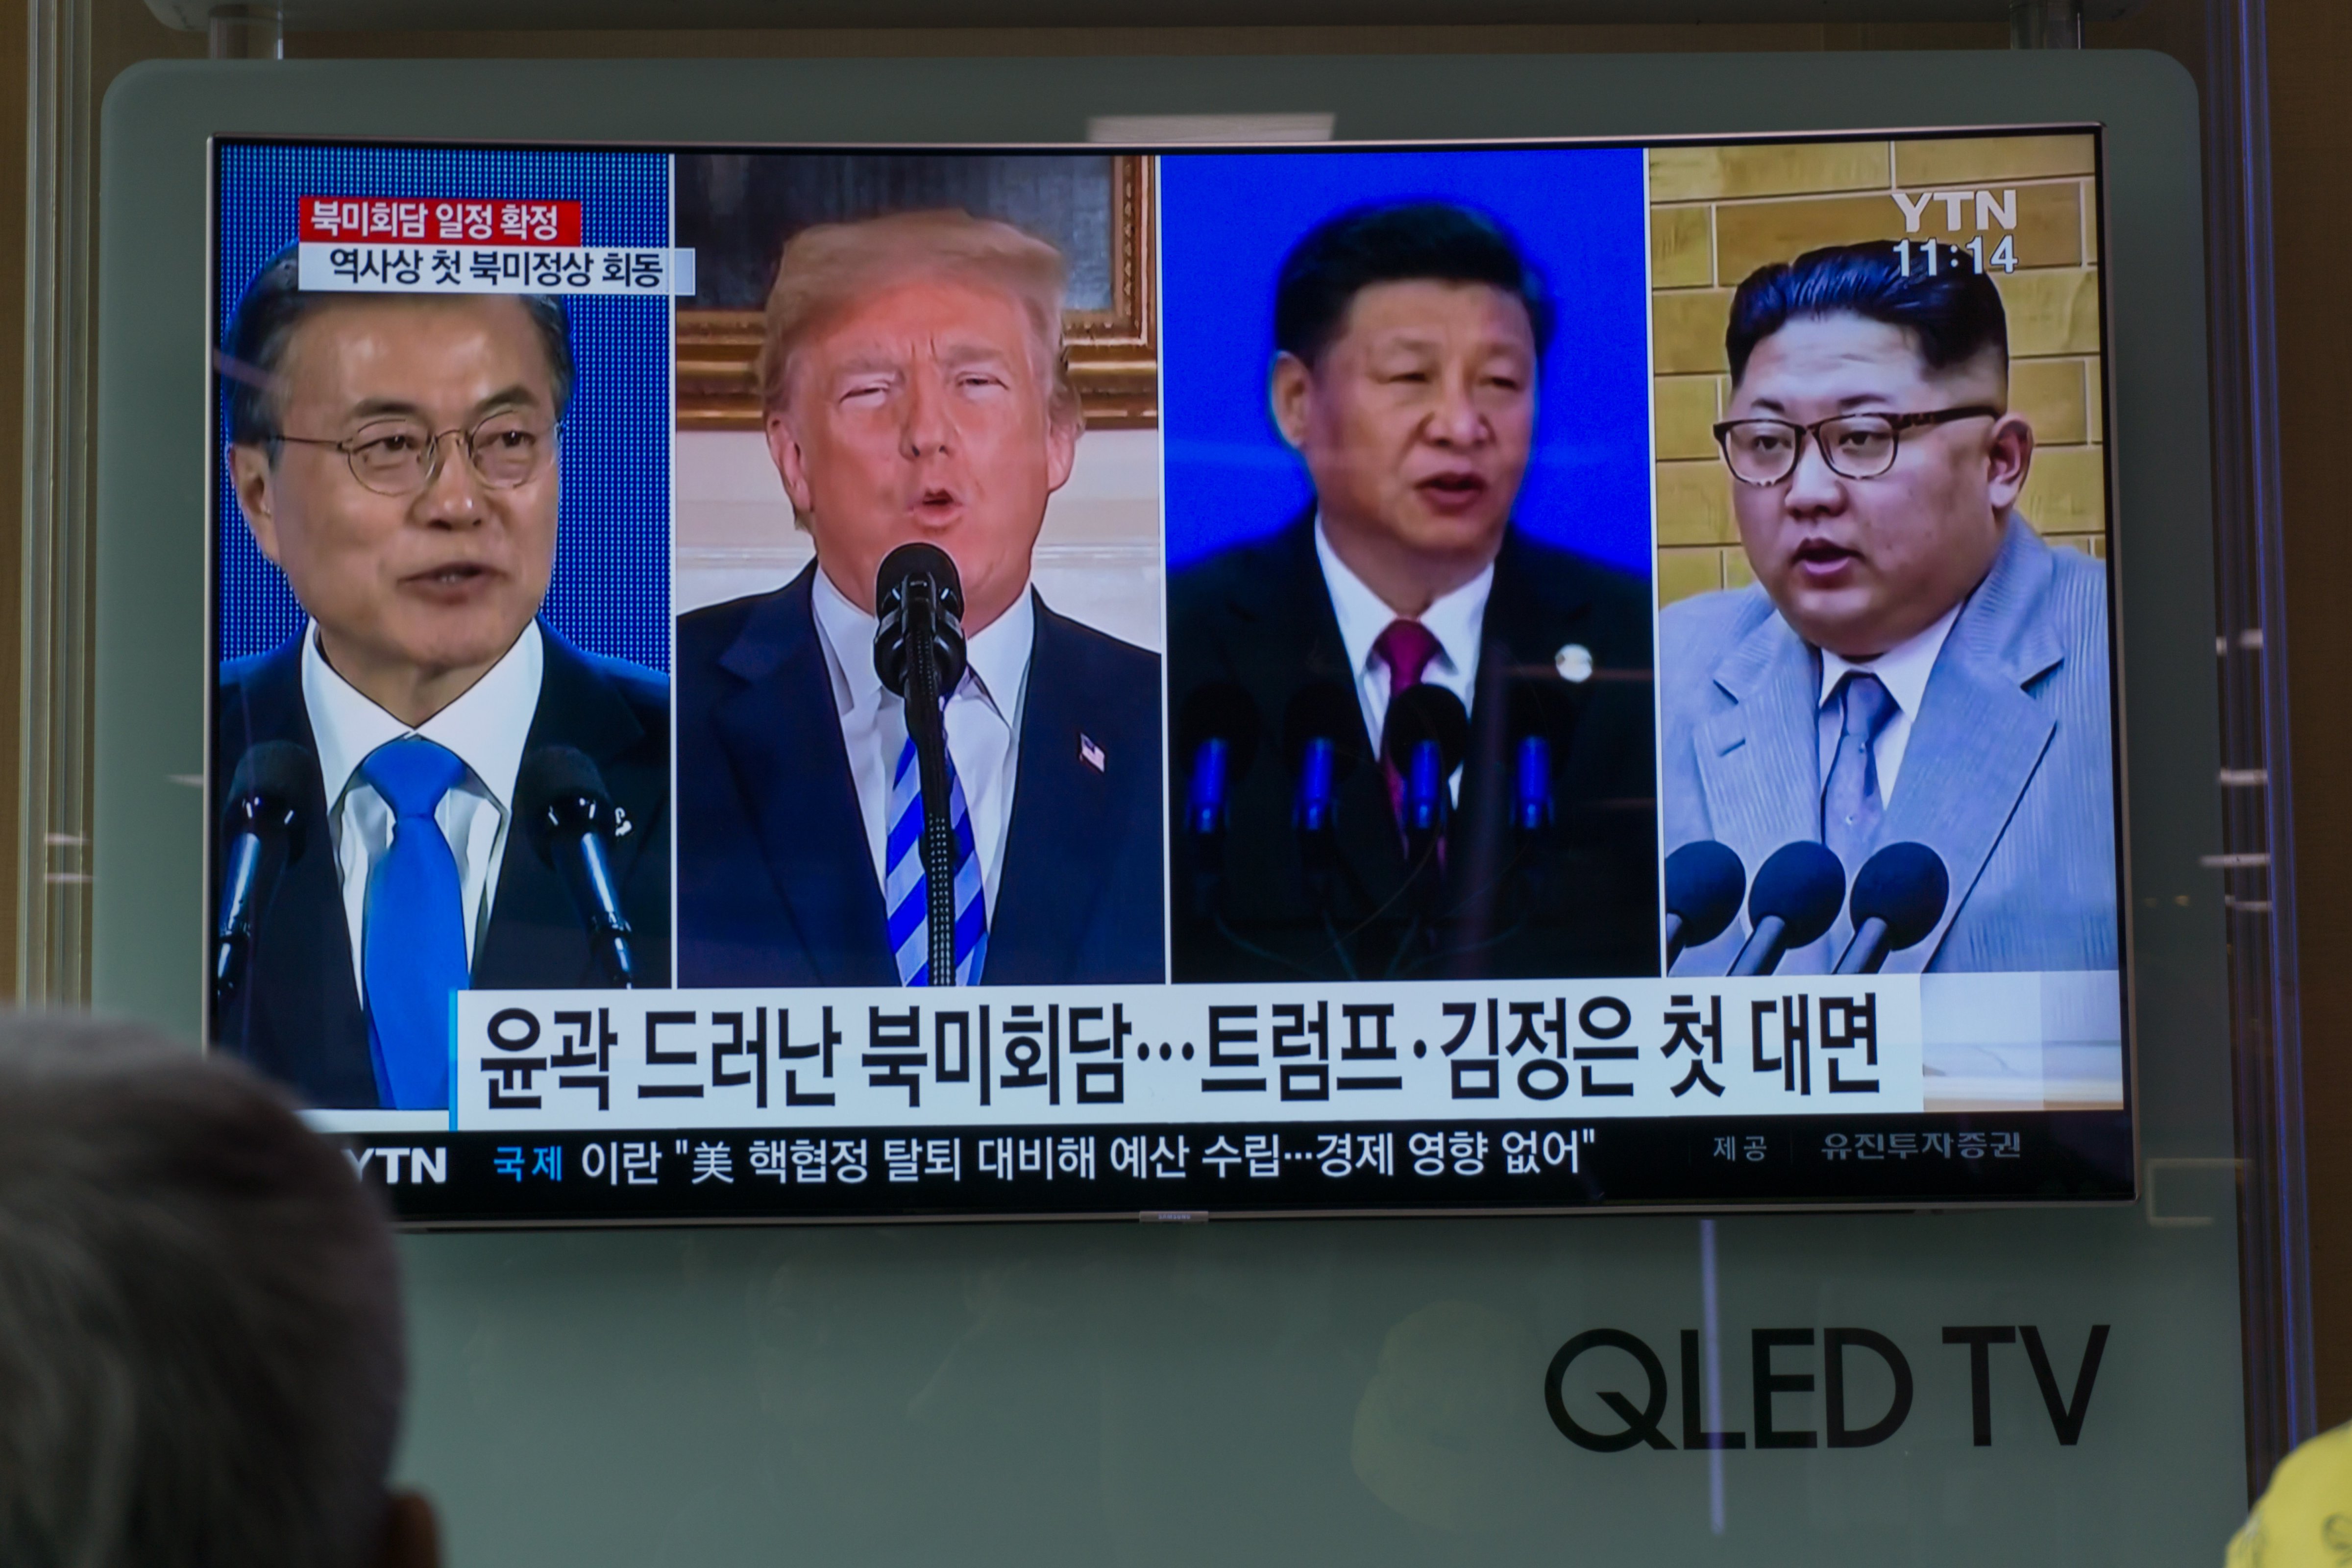 People watch a screen showing images of South Korea's president Moon Jae-in, U.S. president Donald Trump, China's president Xi Jinping, and North Korea's leader Kim Jong Un at a railway station in Seoul on May 11, 2018. (Kim Sue-Han—AFP/Getty Images)